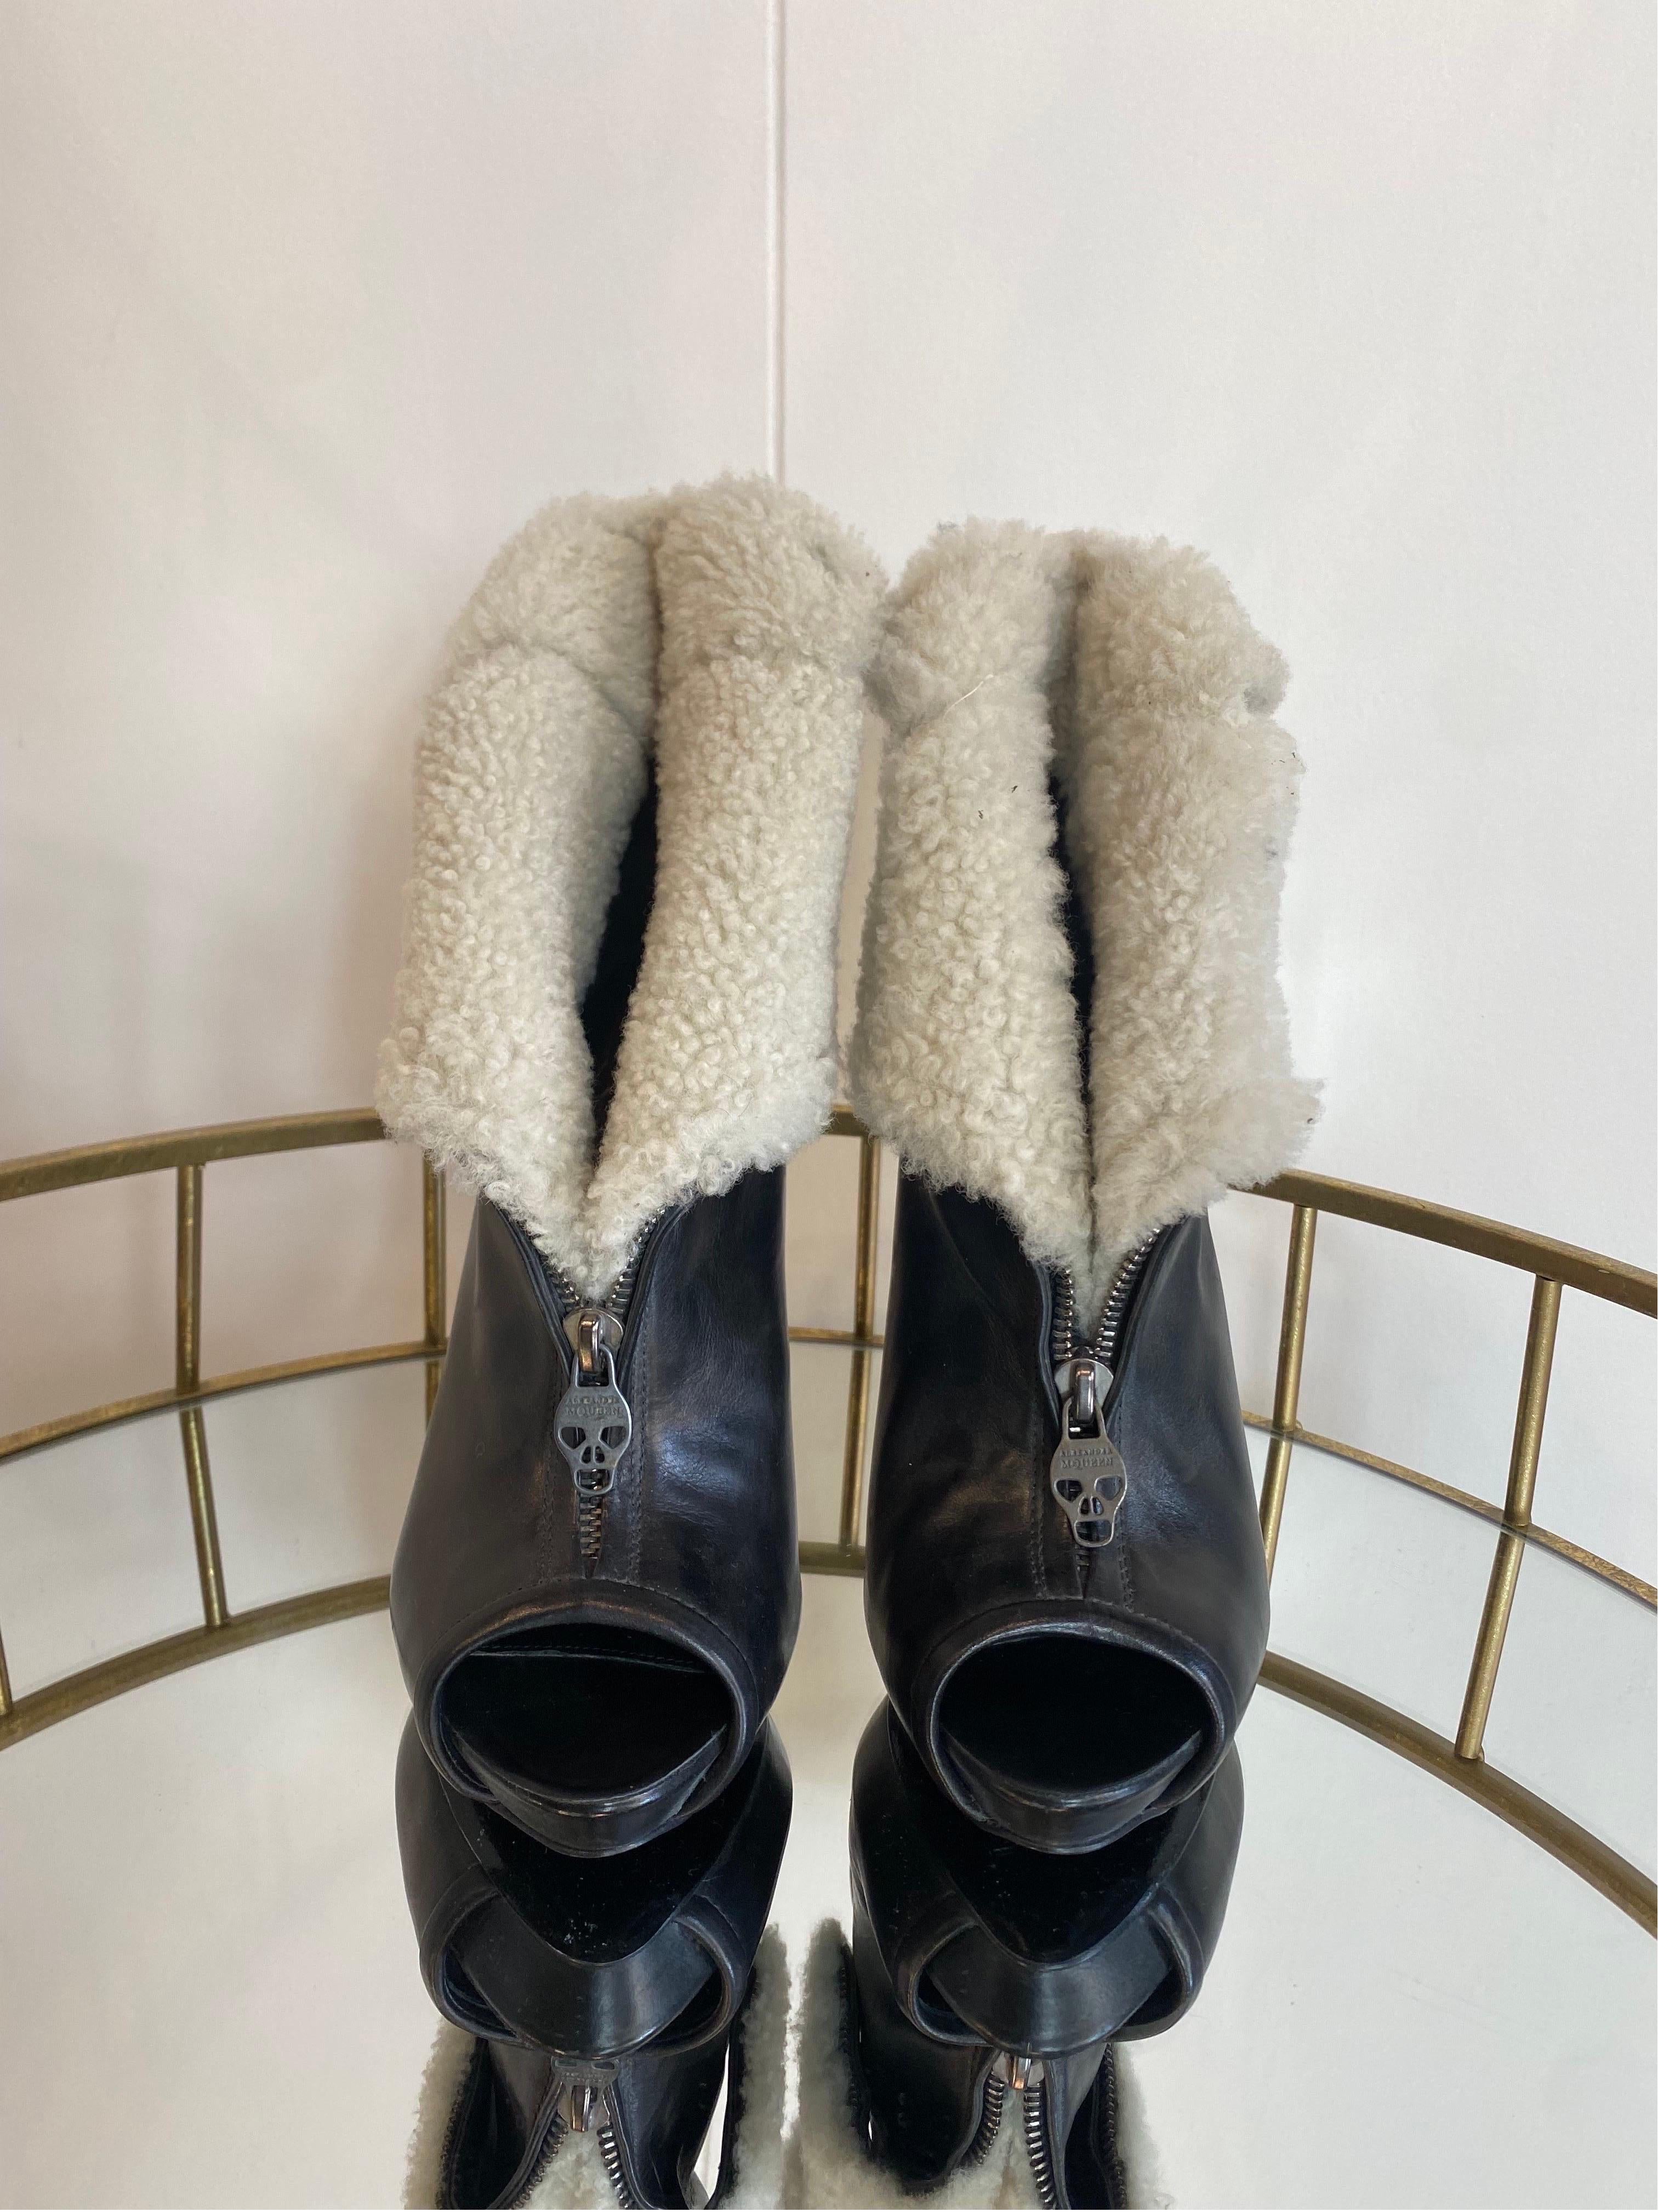 With fur. Open toe.
Zip with logo.
If you zip up and unbutton part of the fur it can become higher like a boot.
Number 38 EU.
Sole 24cm
Heel 13cm
In excellent condition, shows signs of normal use